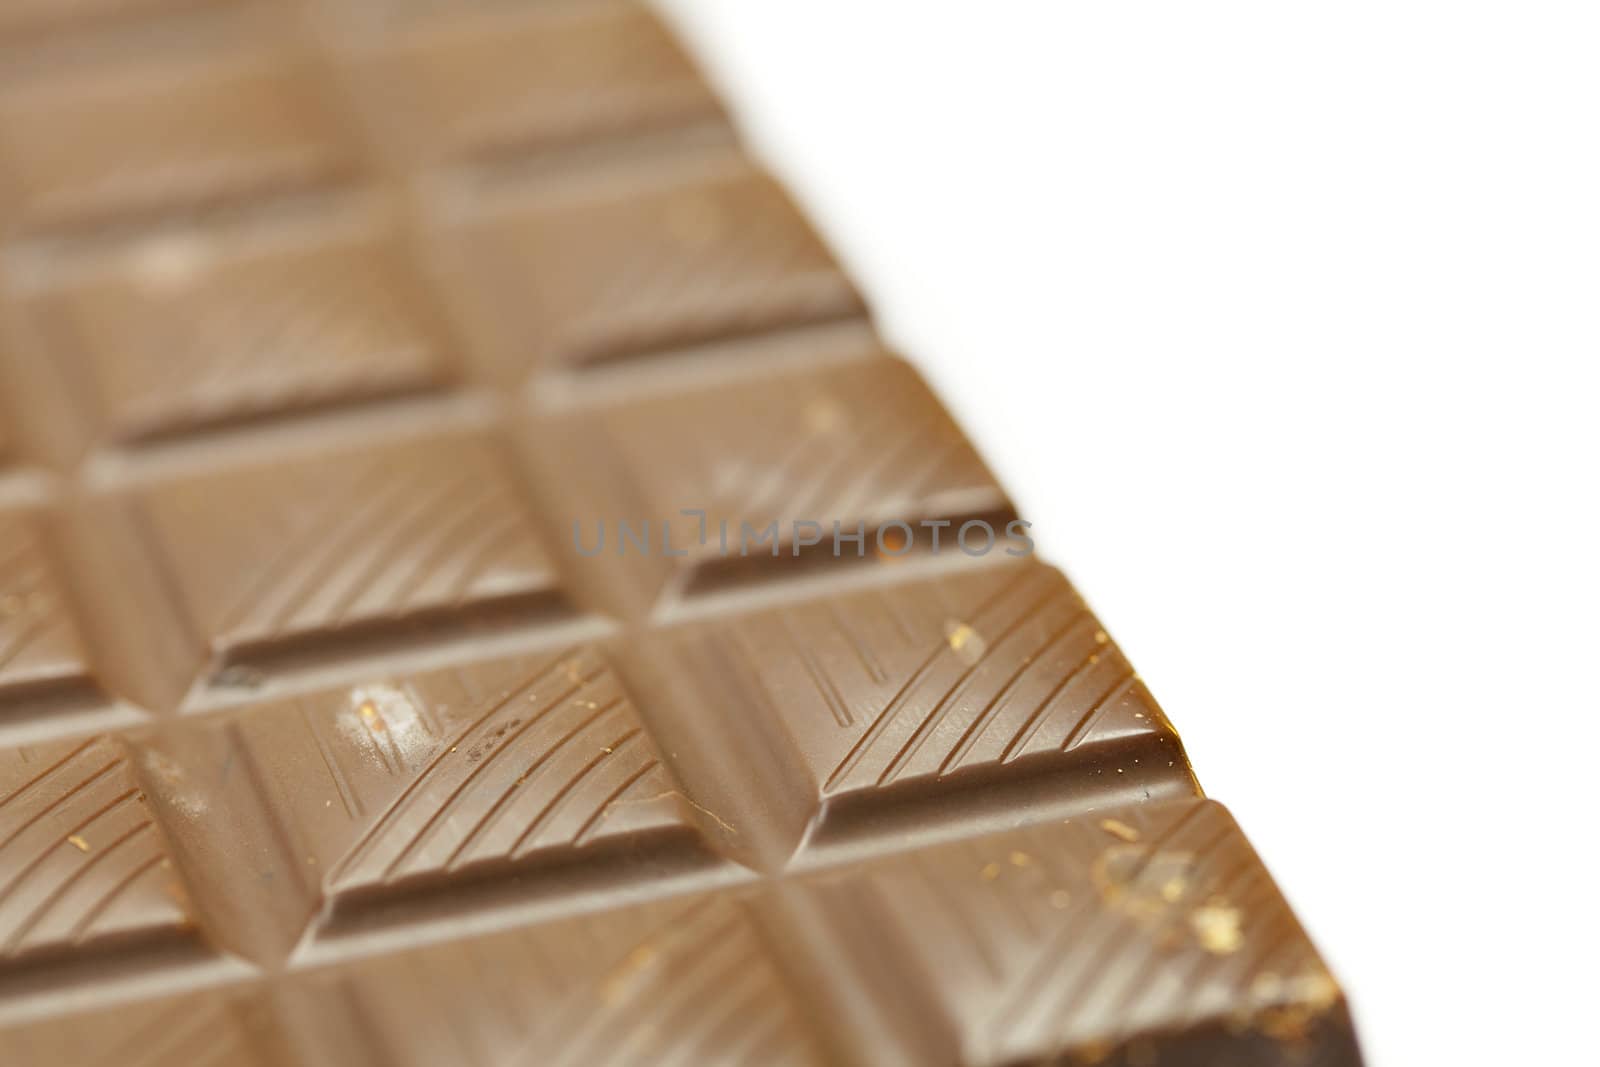 bar of chocolate with nuts